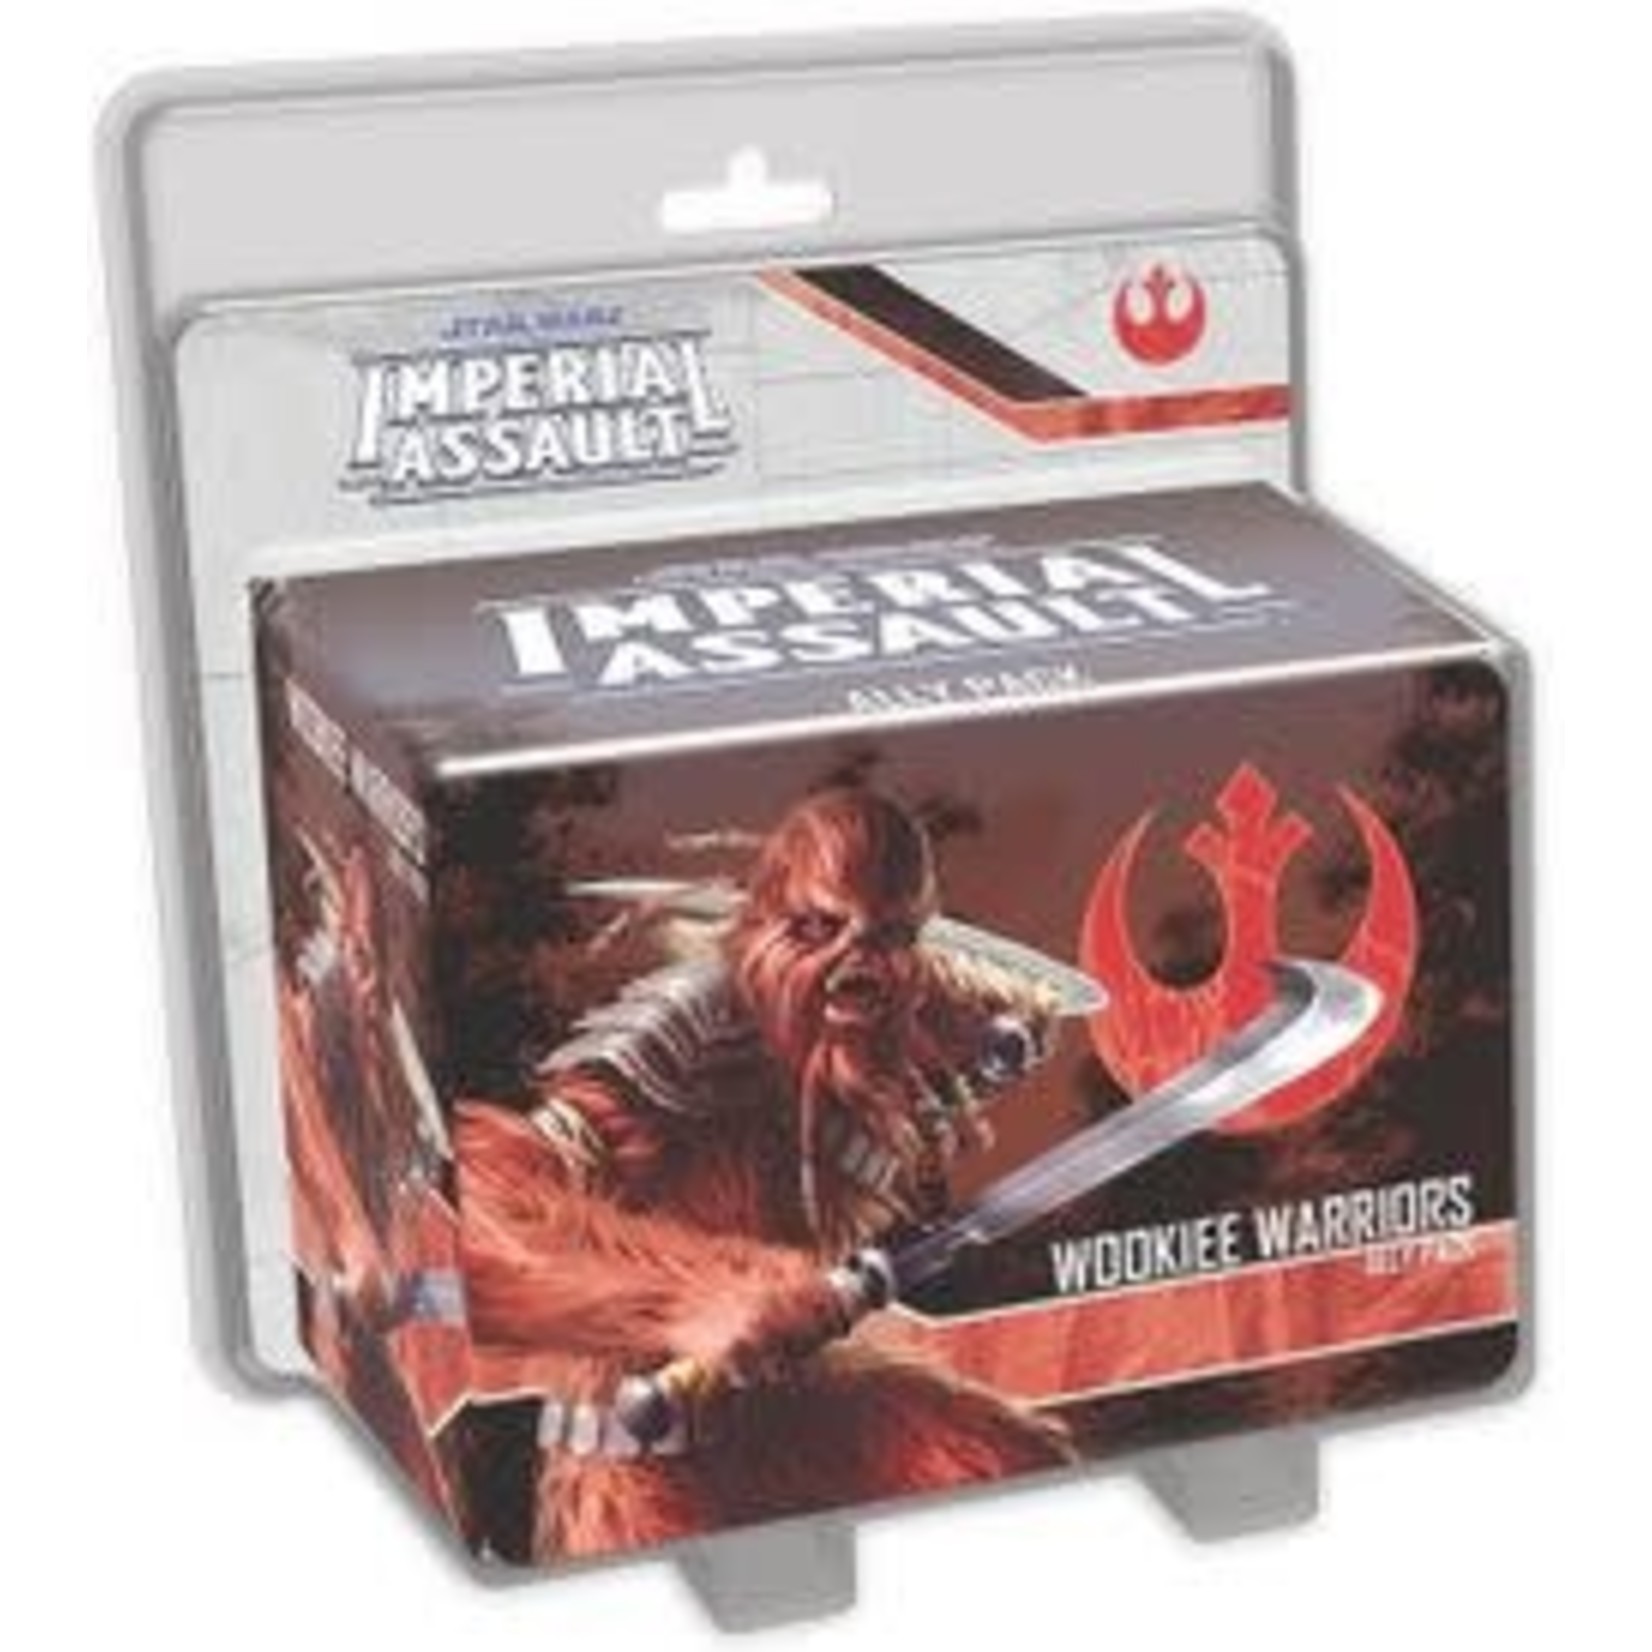 Star Wars Imperial Assault Wookie Warriors Ally Pack